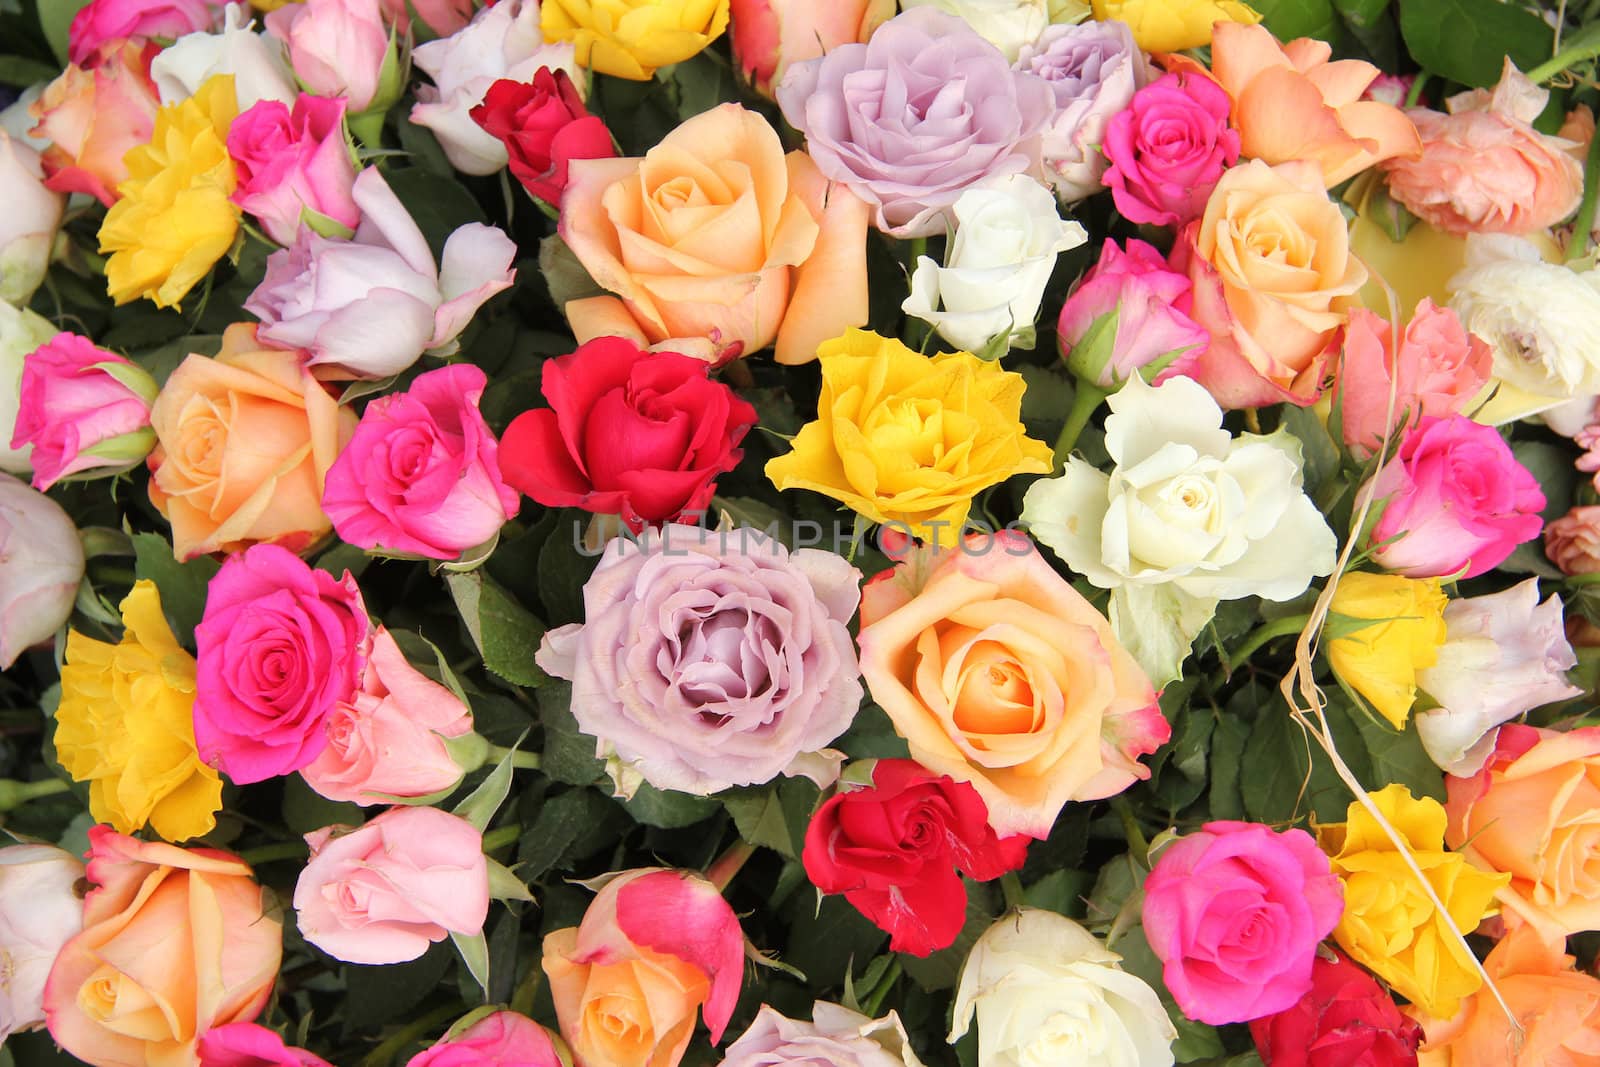 Mixed colored rose bouquet in bright colors